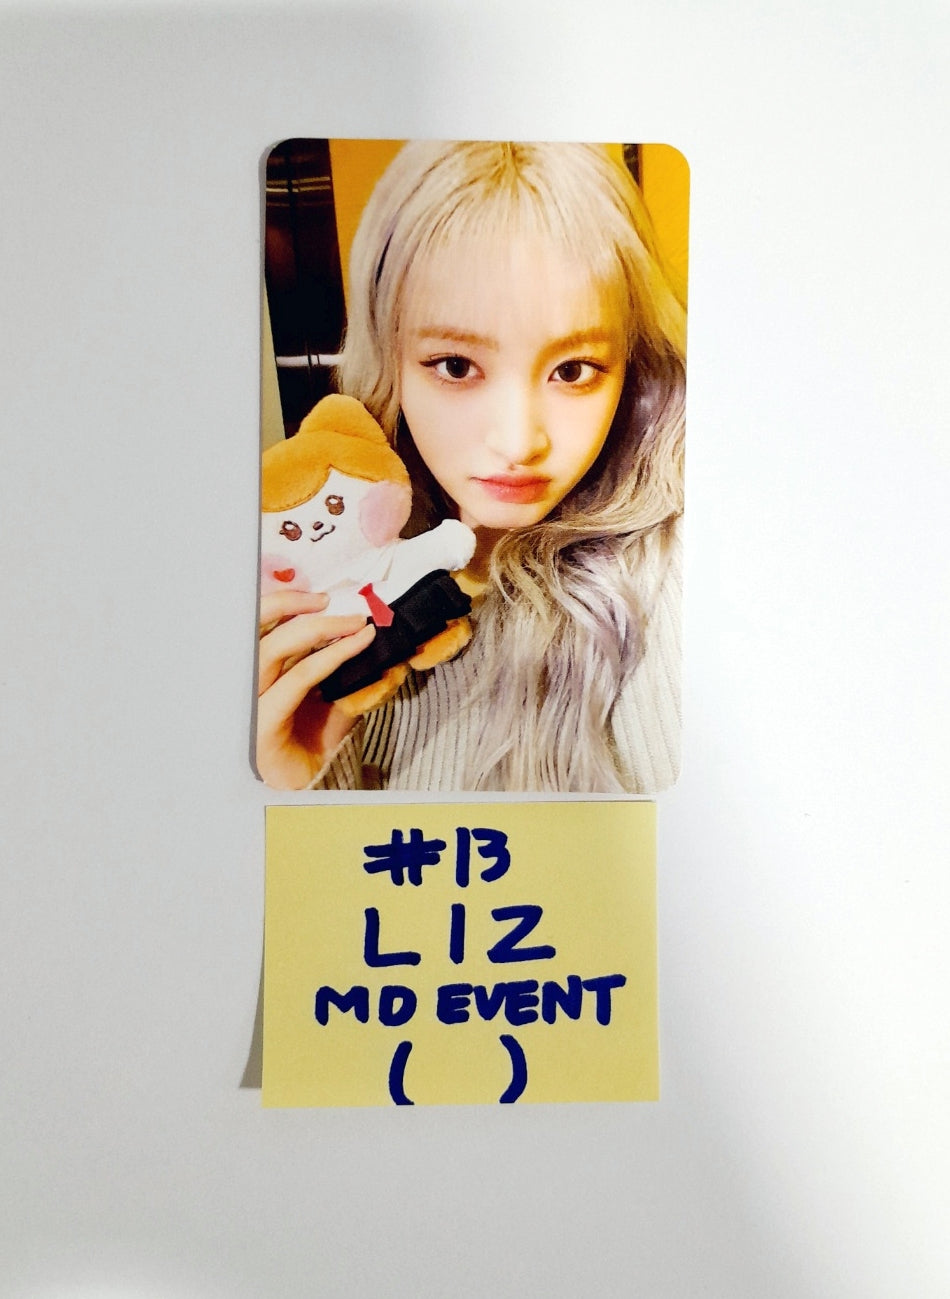 IVE "IVE Switch" - Line Friends Gangnam Flagship Store MD Event Photocard [24. 05. 03]